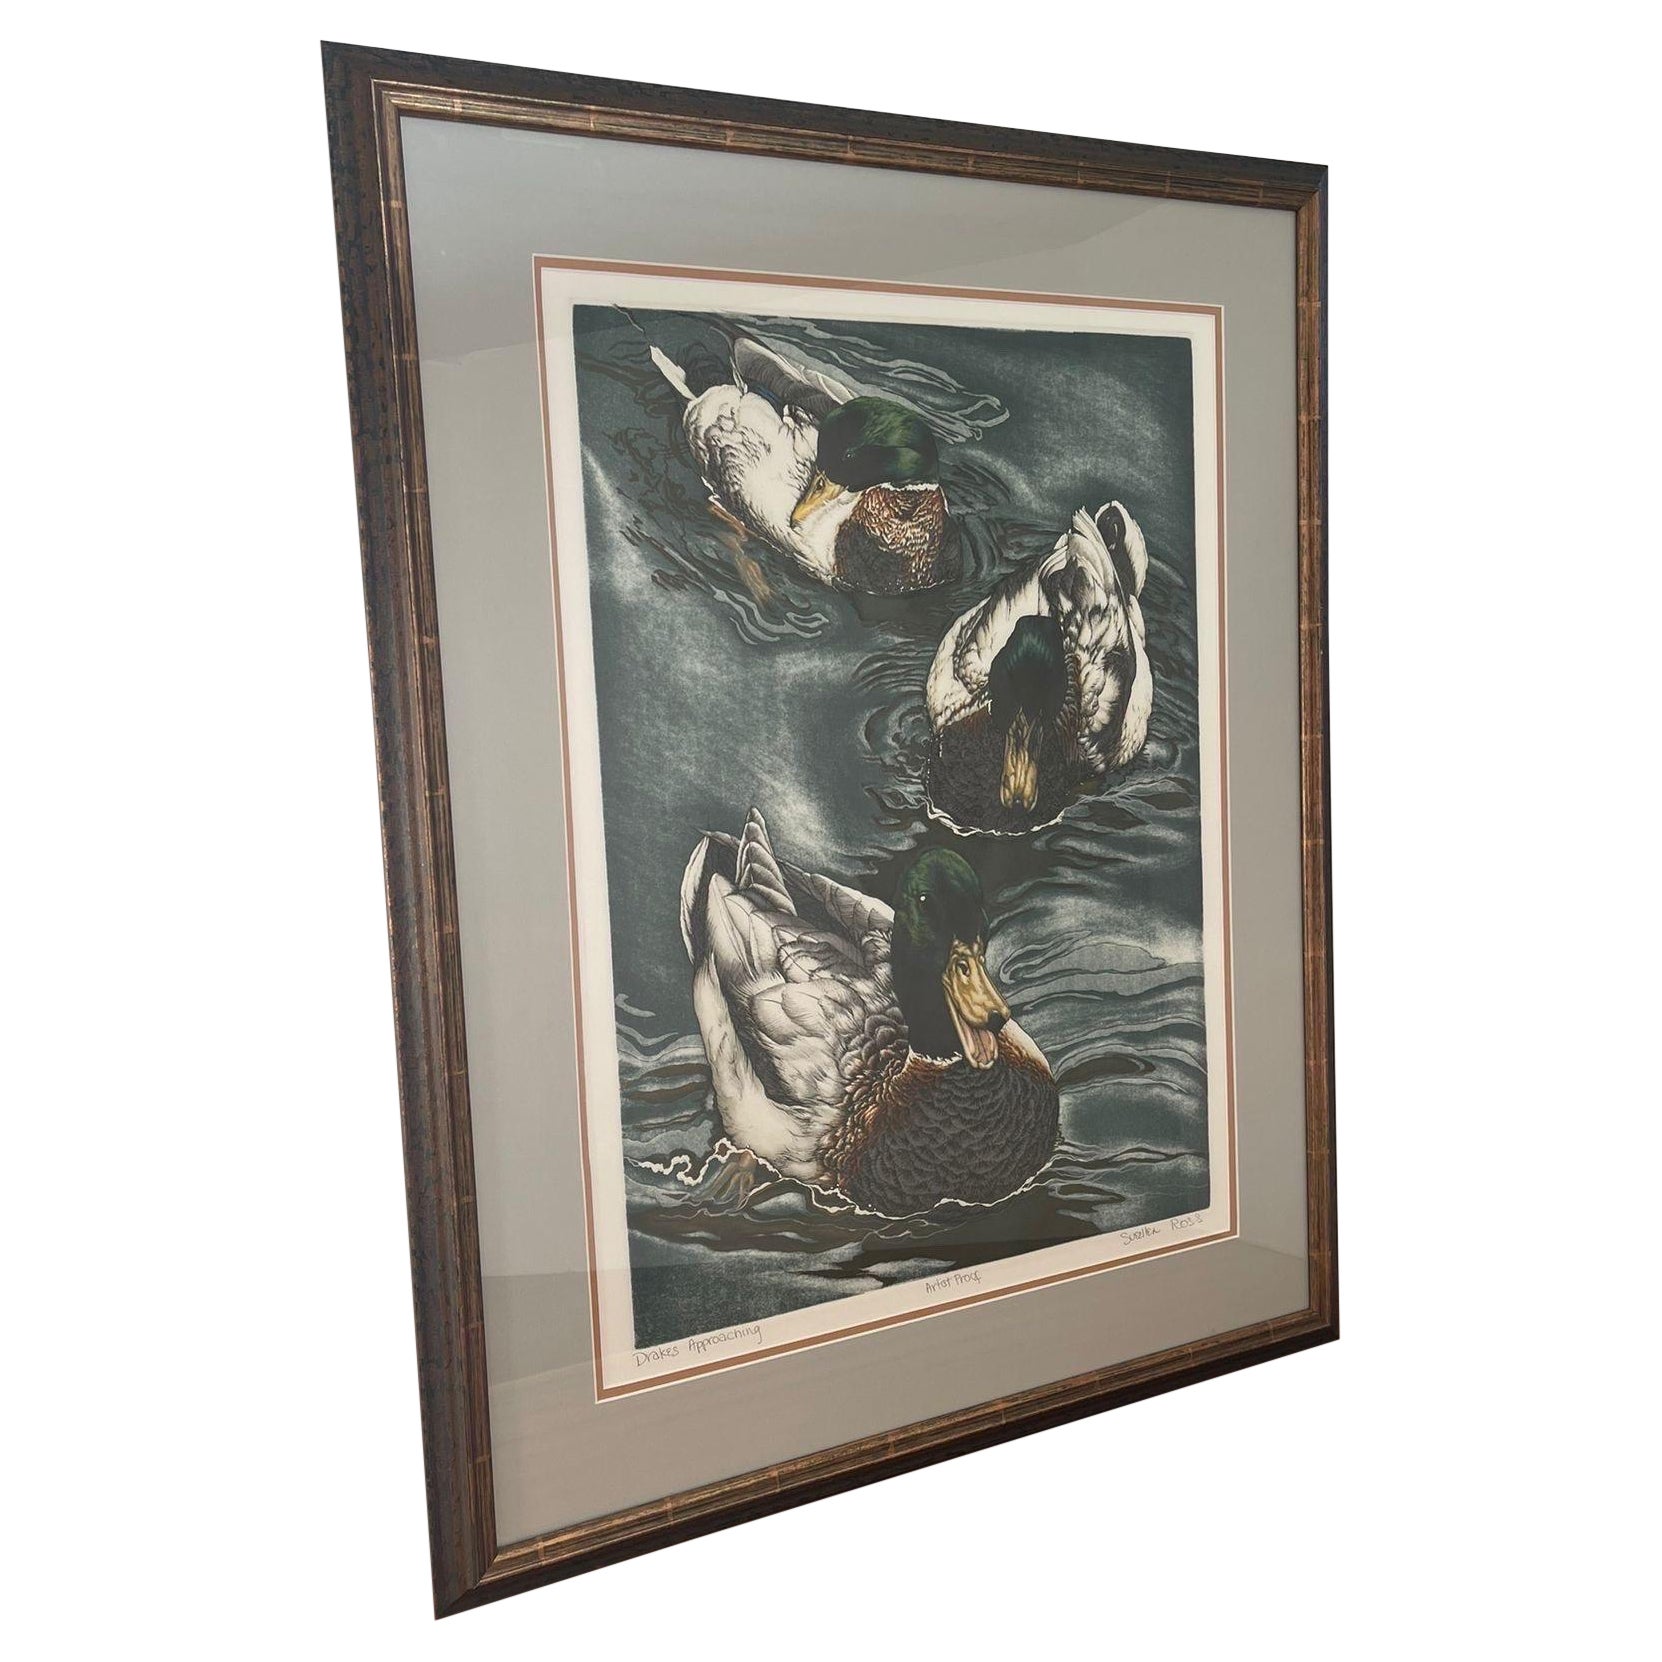 Vintage Framed Art Print Titled “ Drakes Approaching “ by Suellen Ross